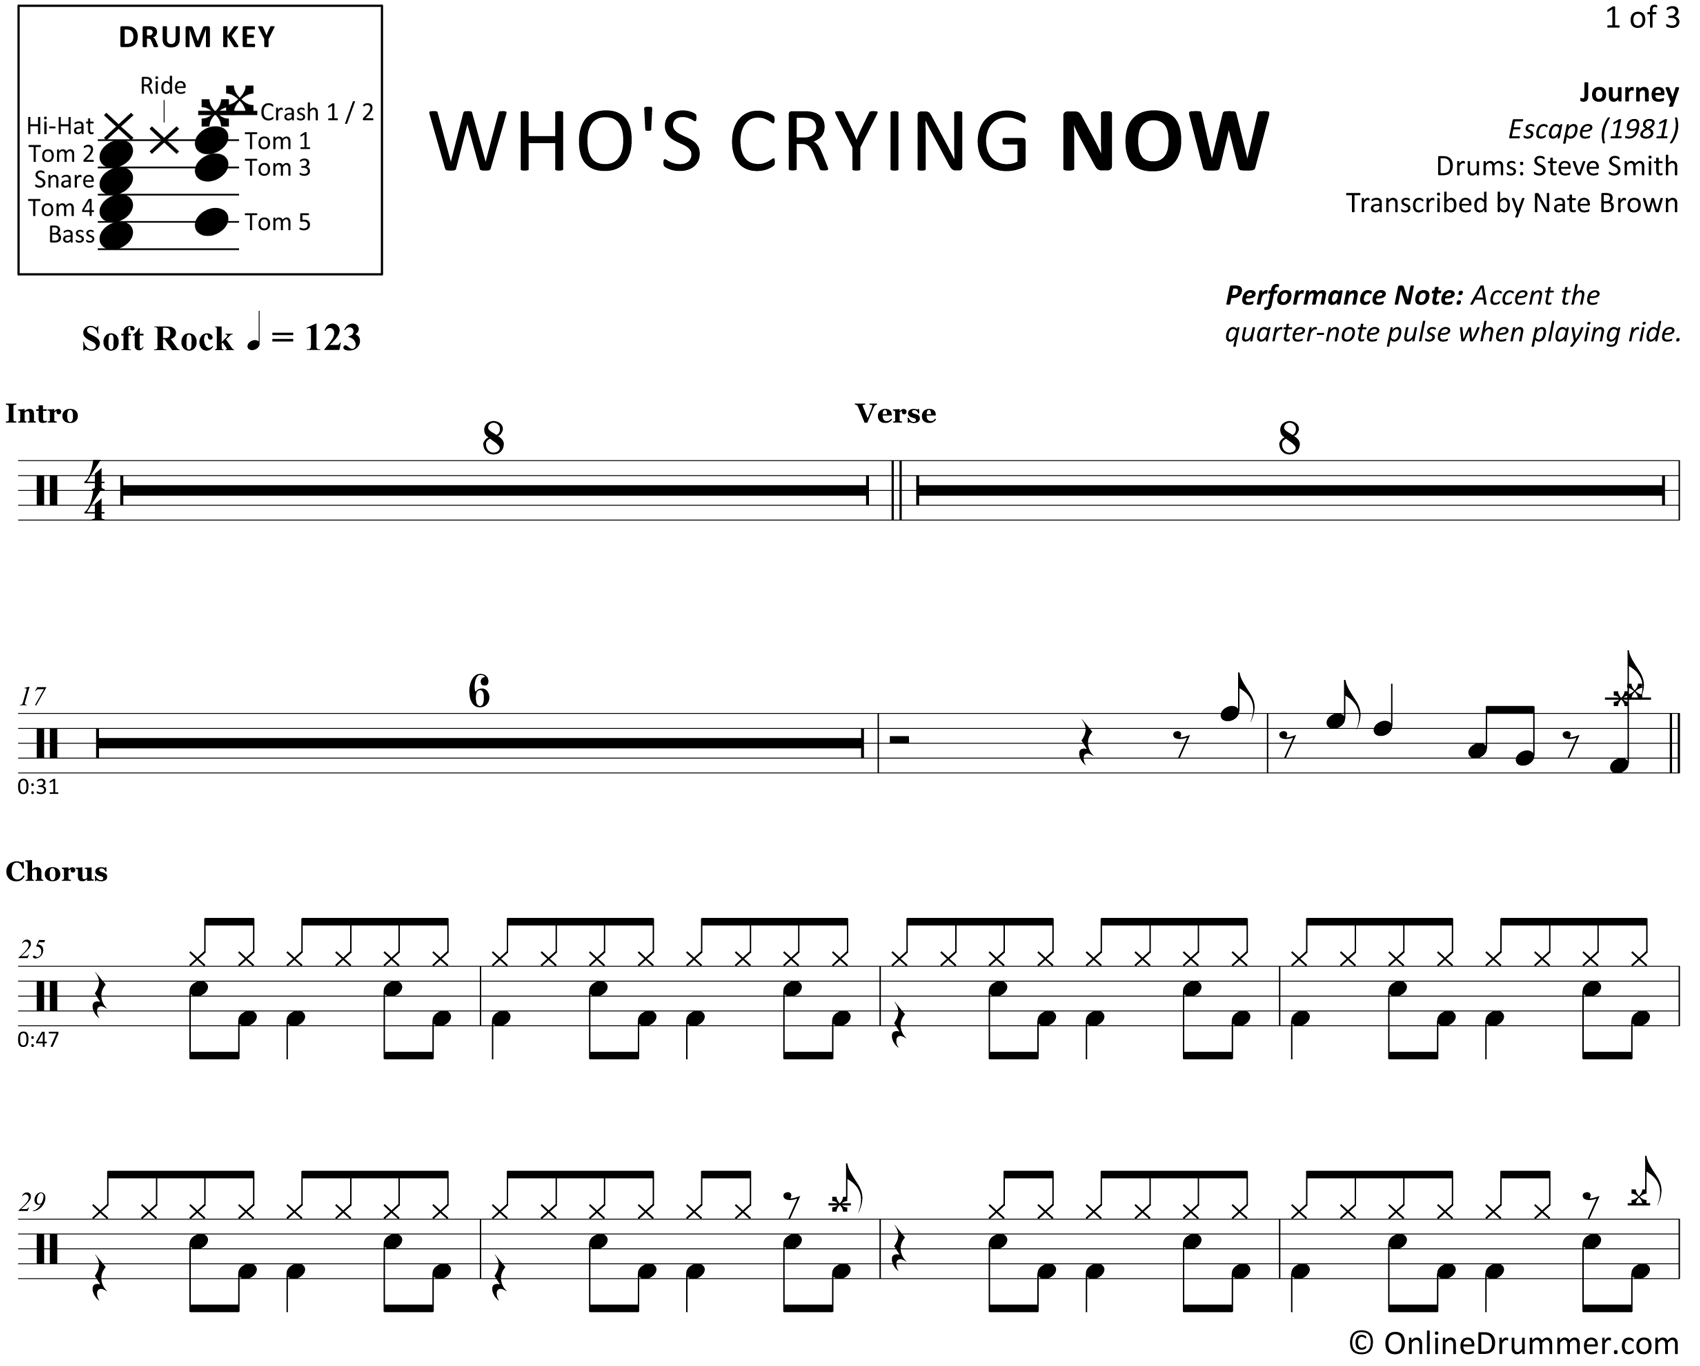 Who's Crying Now - Journey - Drum Sheet Music